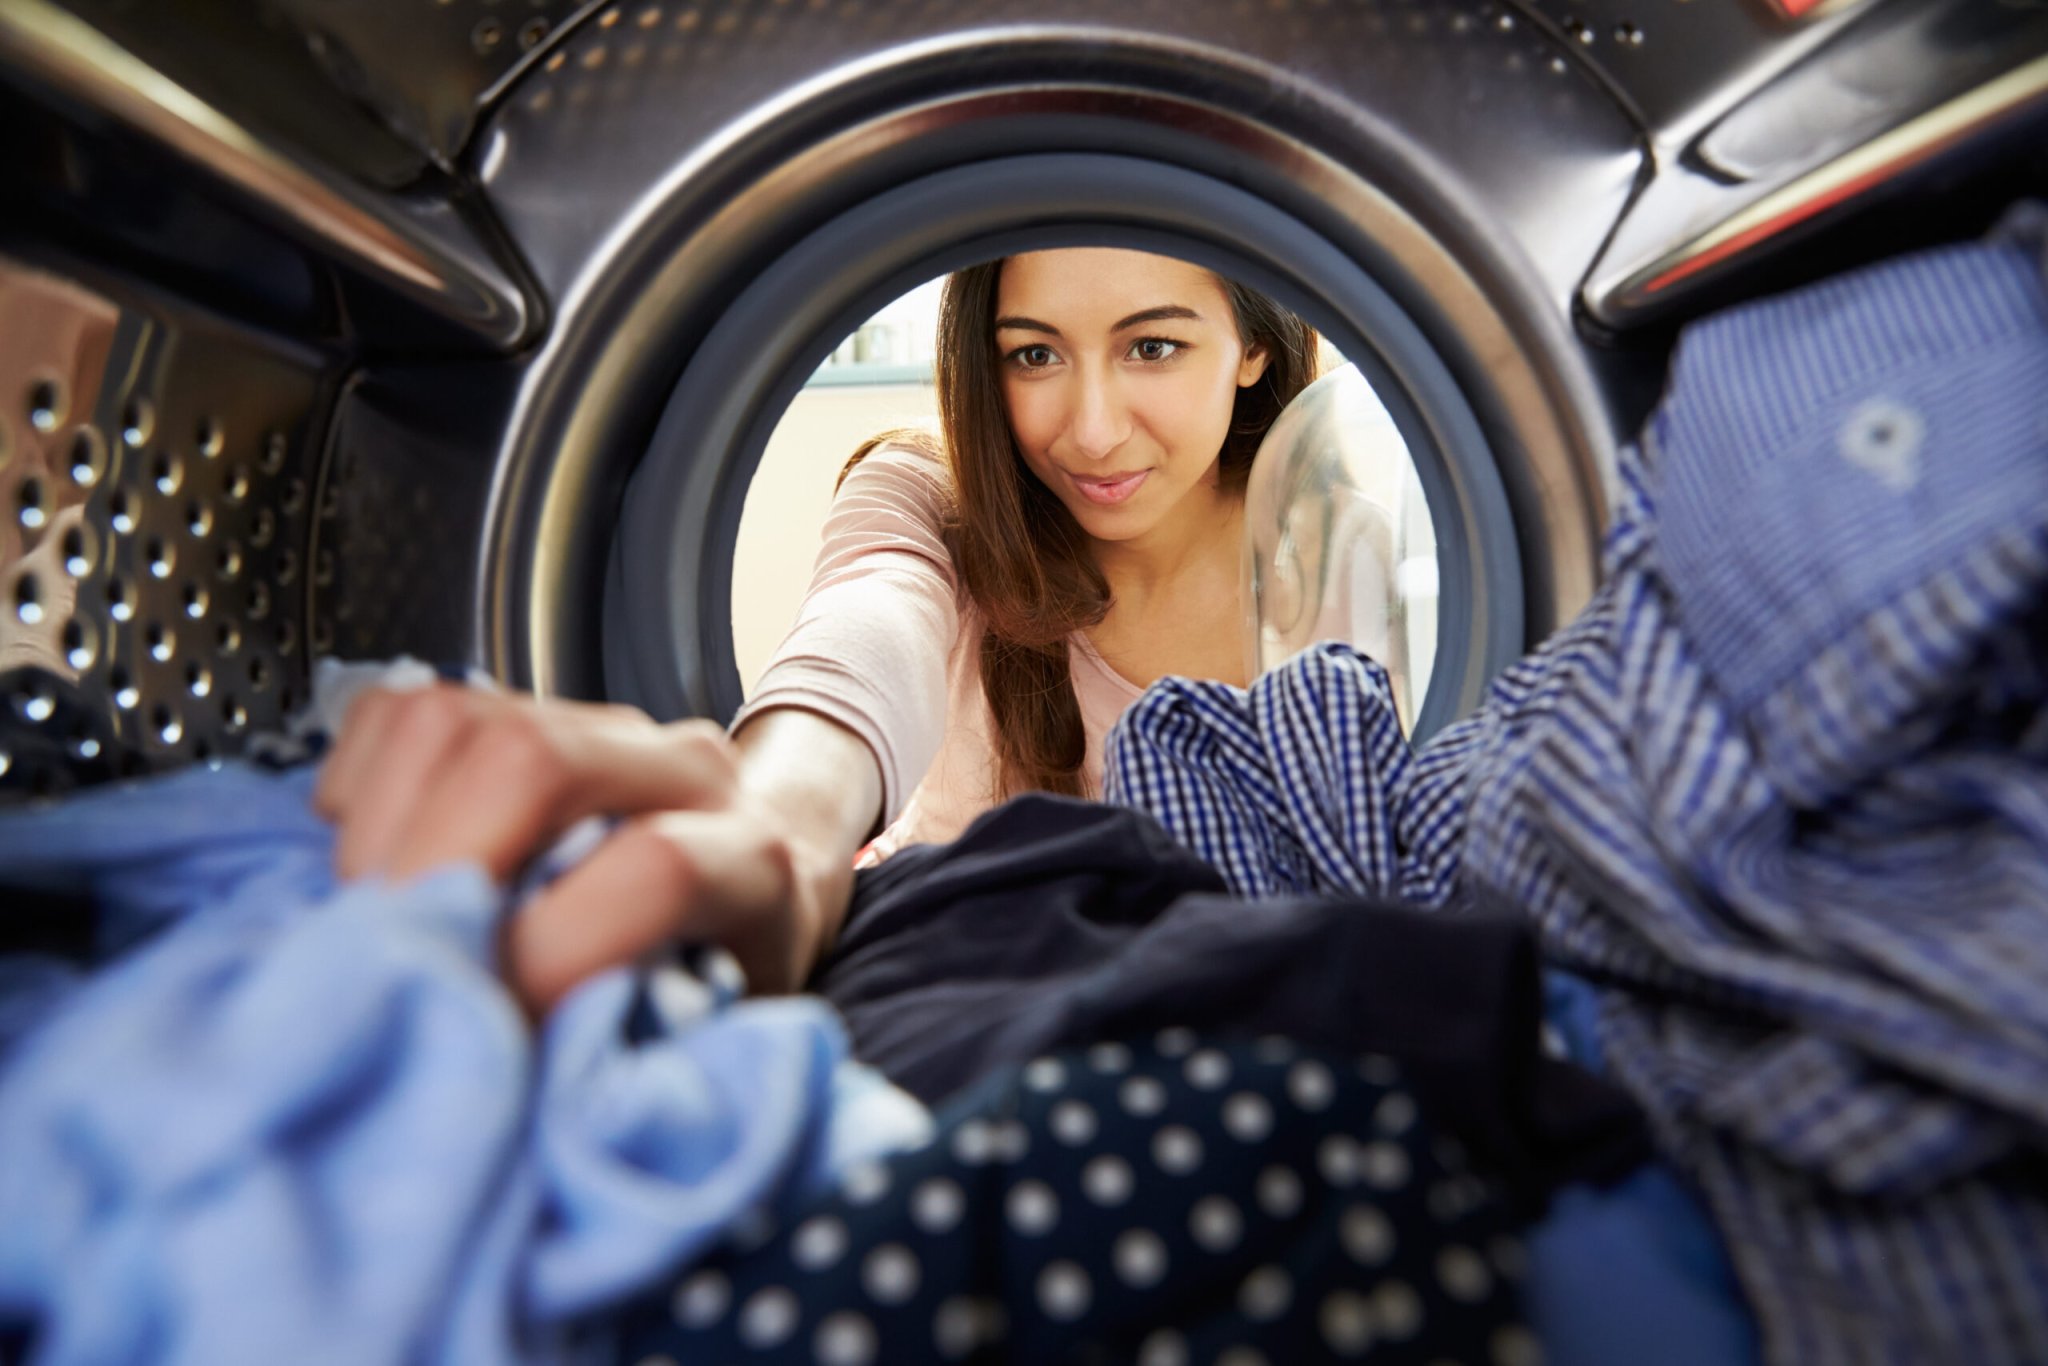 6 Common Laundry Mistakes You're Probably Making & How To Fix Them